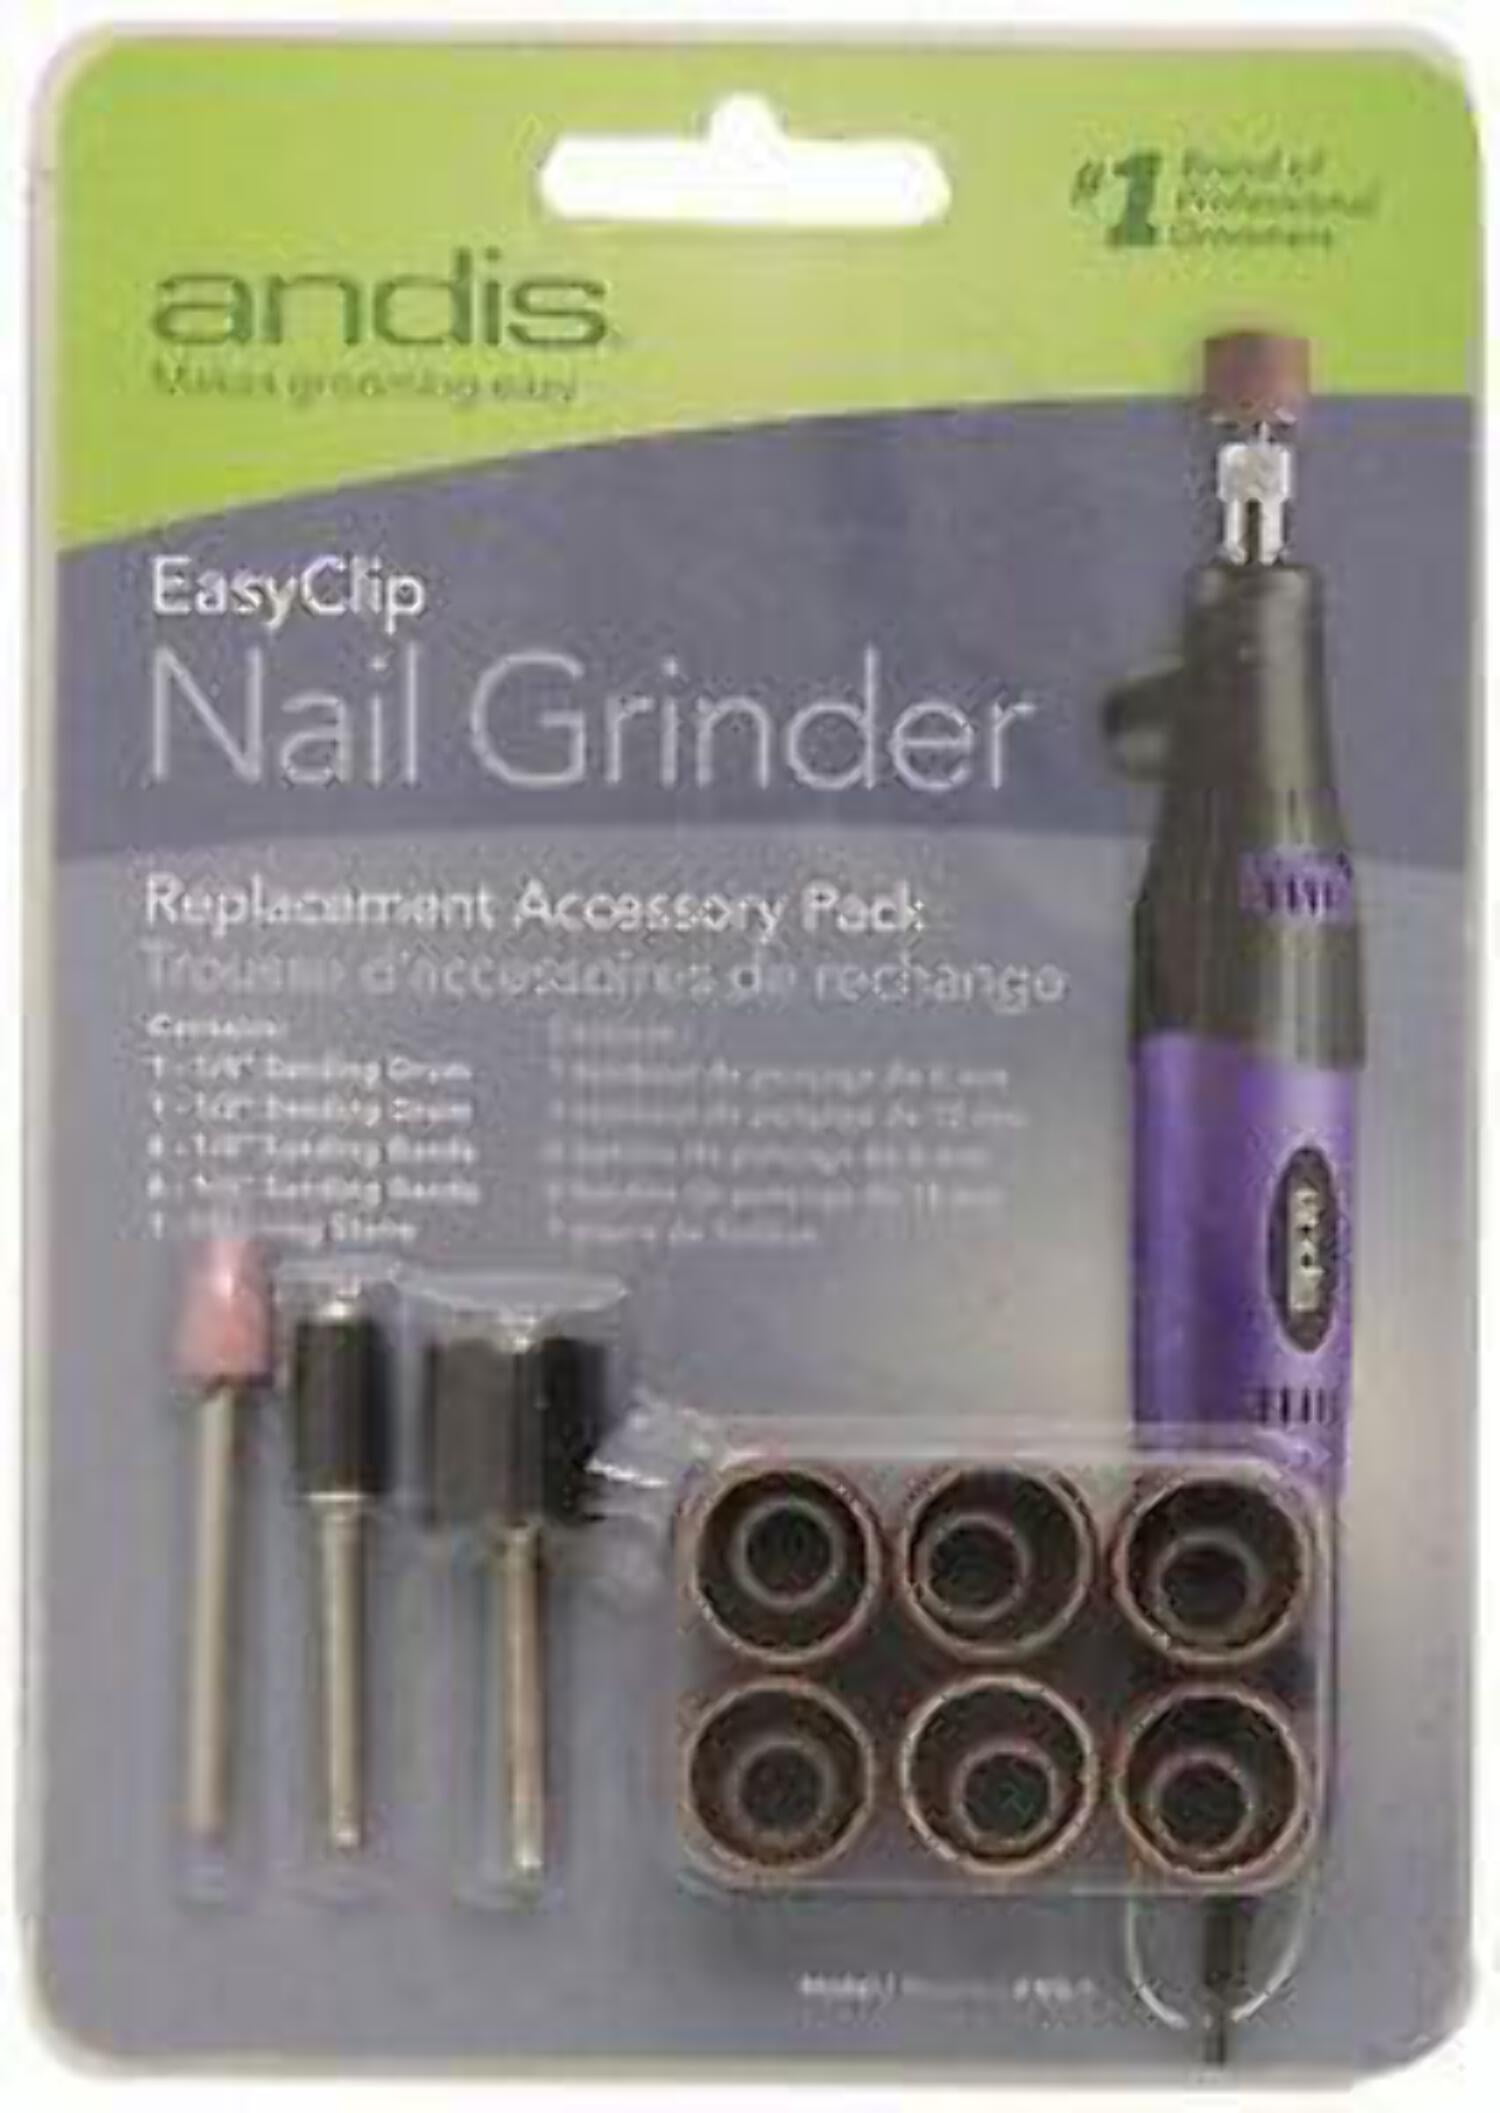 Nail Grinder For Dogs : : Andis Nail Grinder Replacement  Accessory Pack, Multi, 5.75 x 0.50 x 4.00 inches (65920)